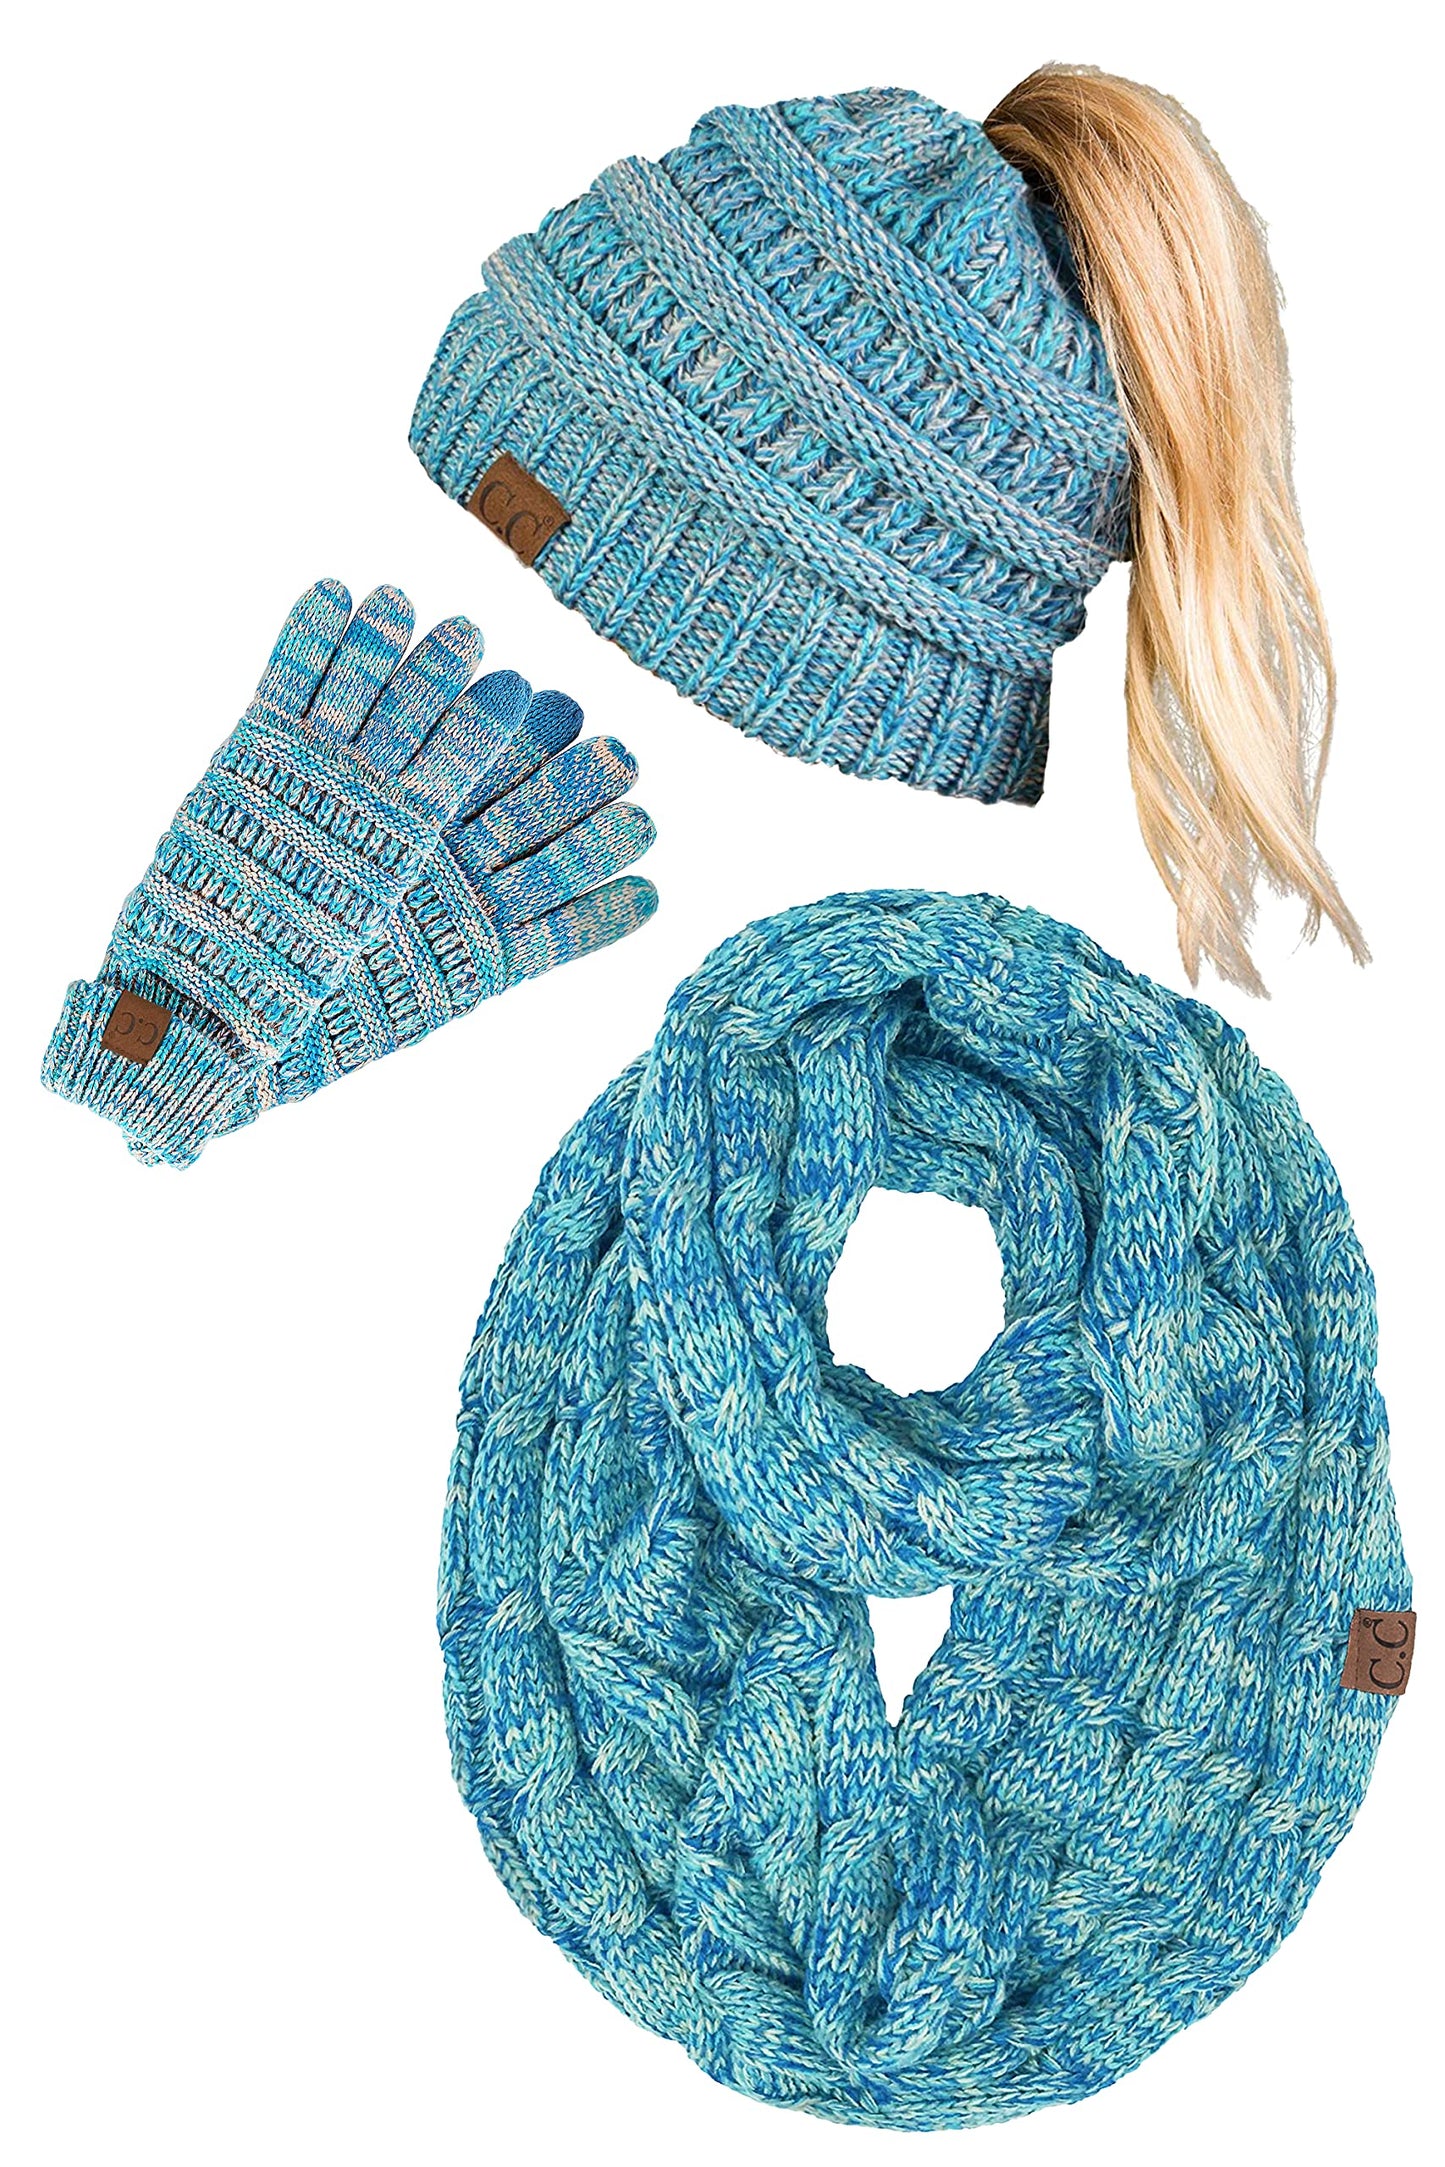 Ponytail Beanie, Infinity Scarf & Gloves Matching Set by Funky Junque